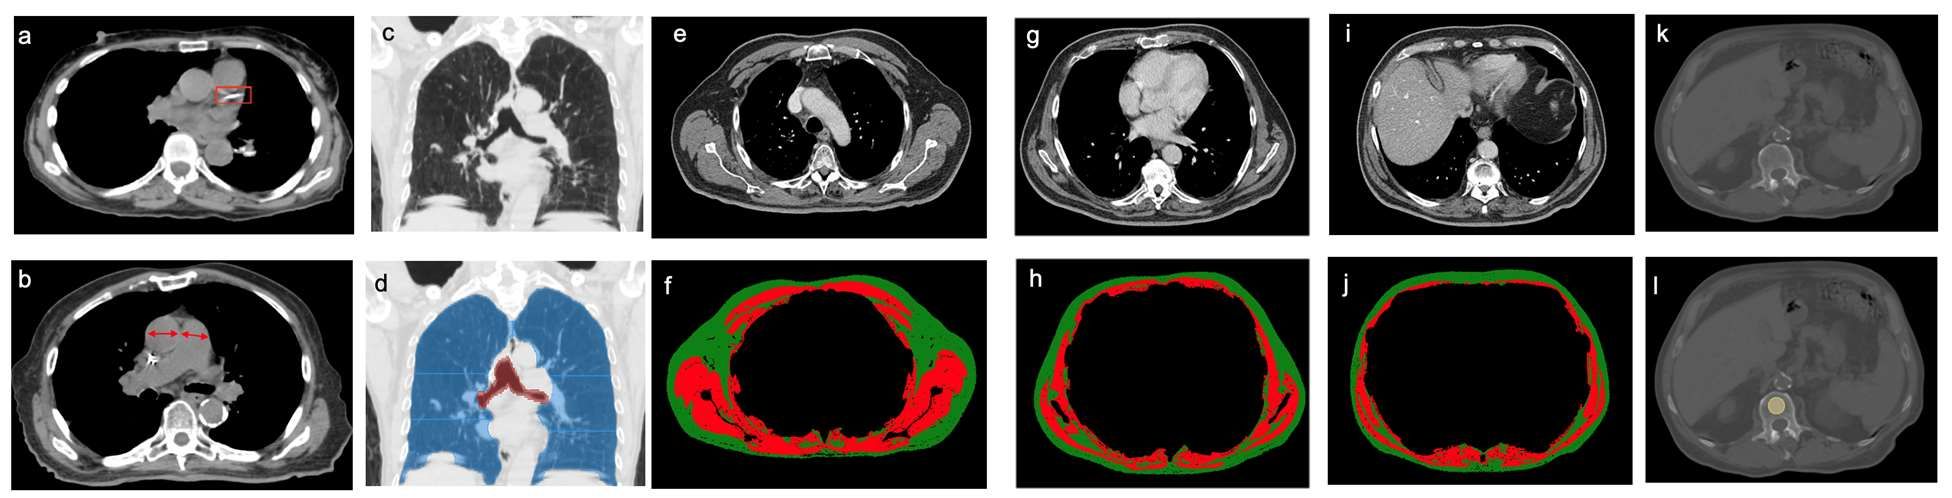 Quantitative analysis of CT images improved clinical stratification and predicted survival outcomes in the study.